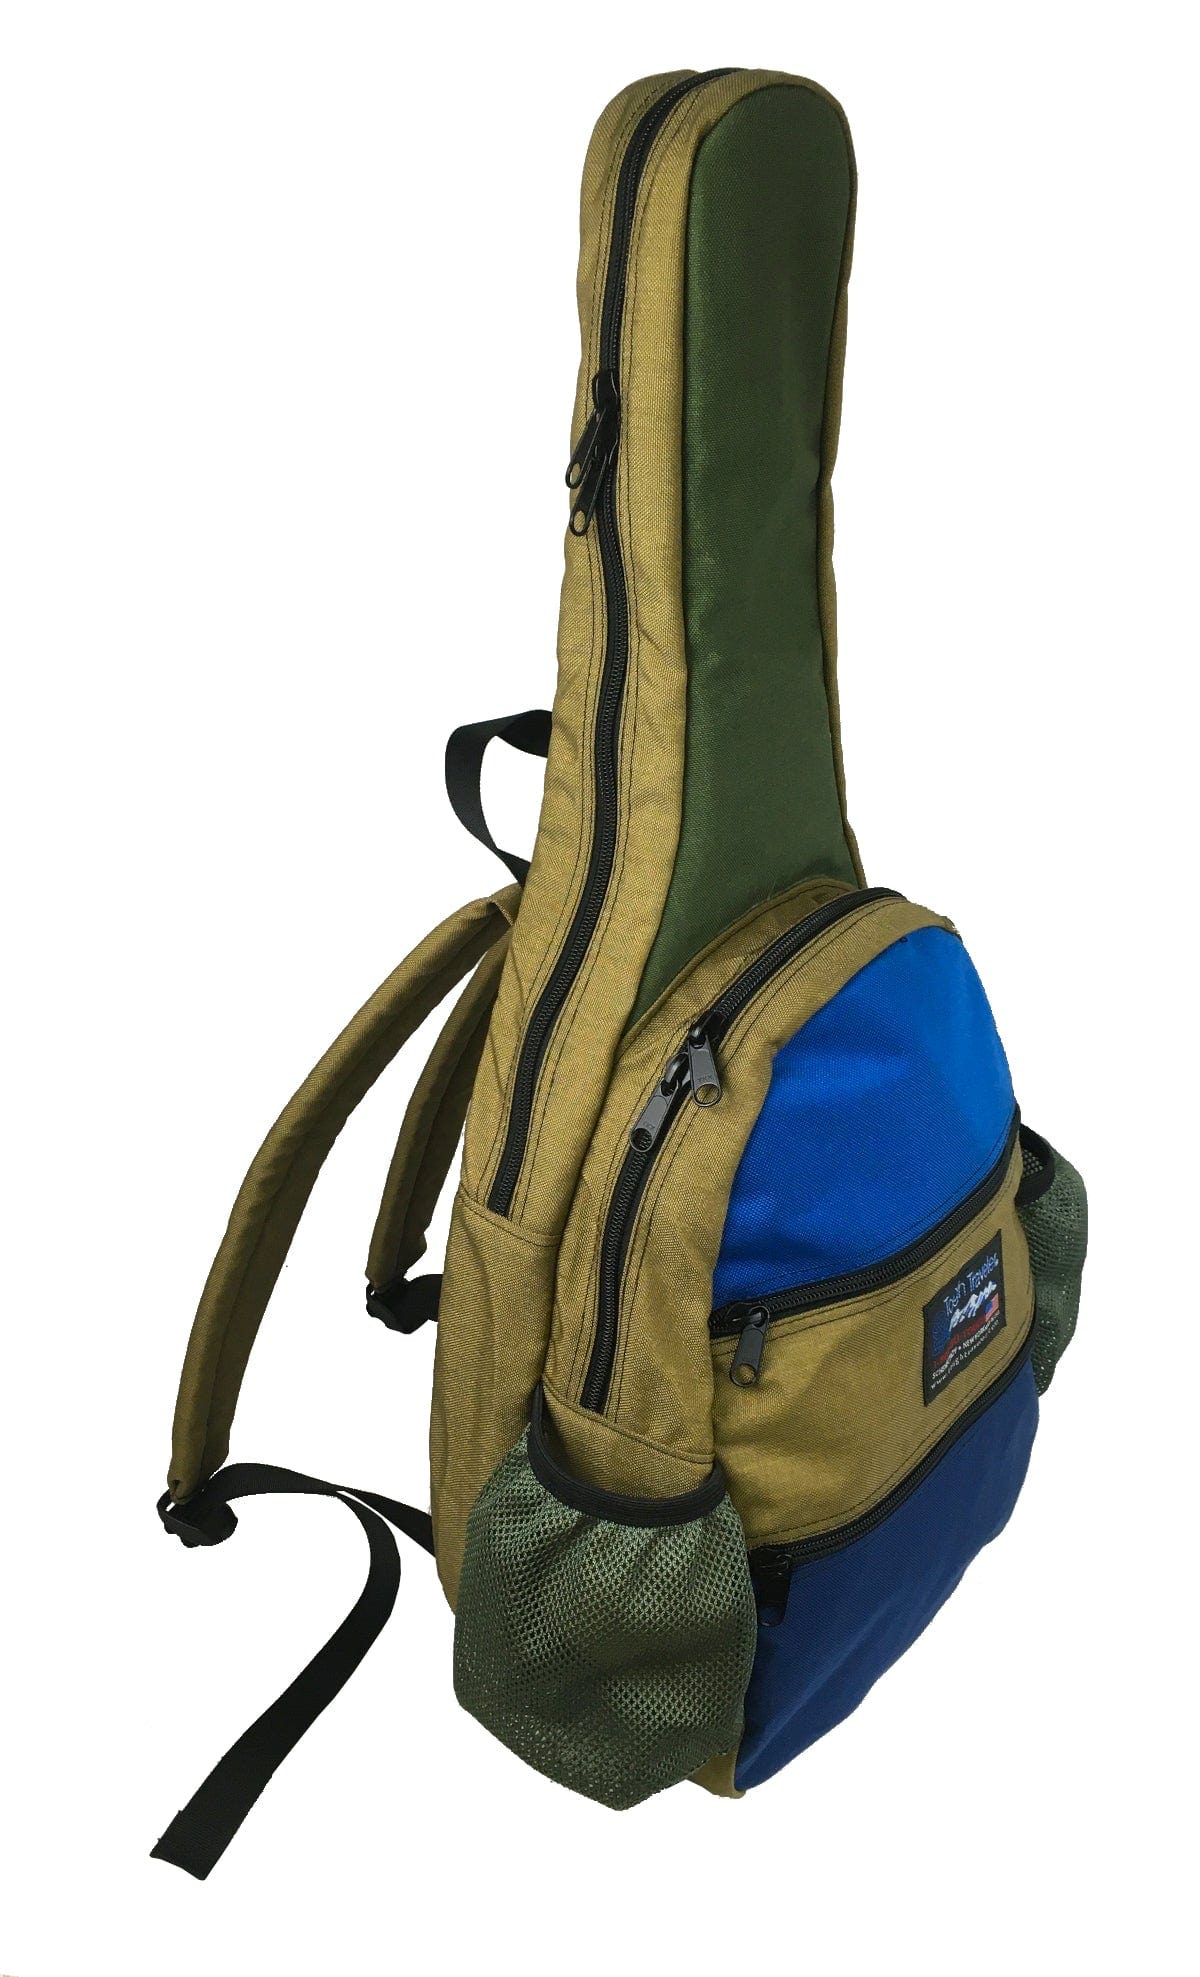 Made in USA TENNR BACKPACK DELUXE 